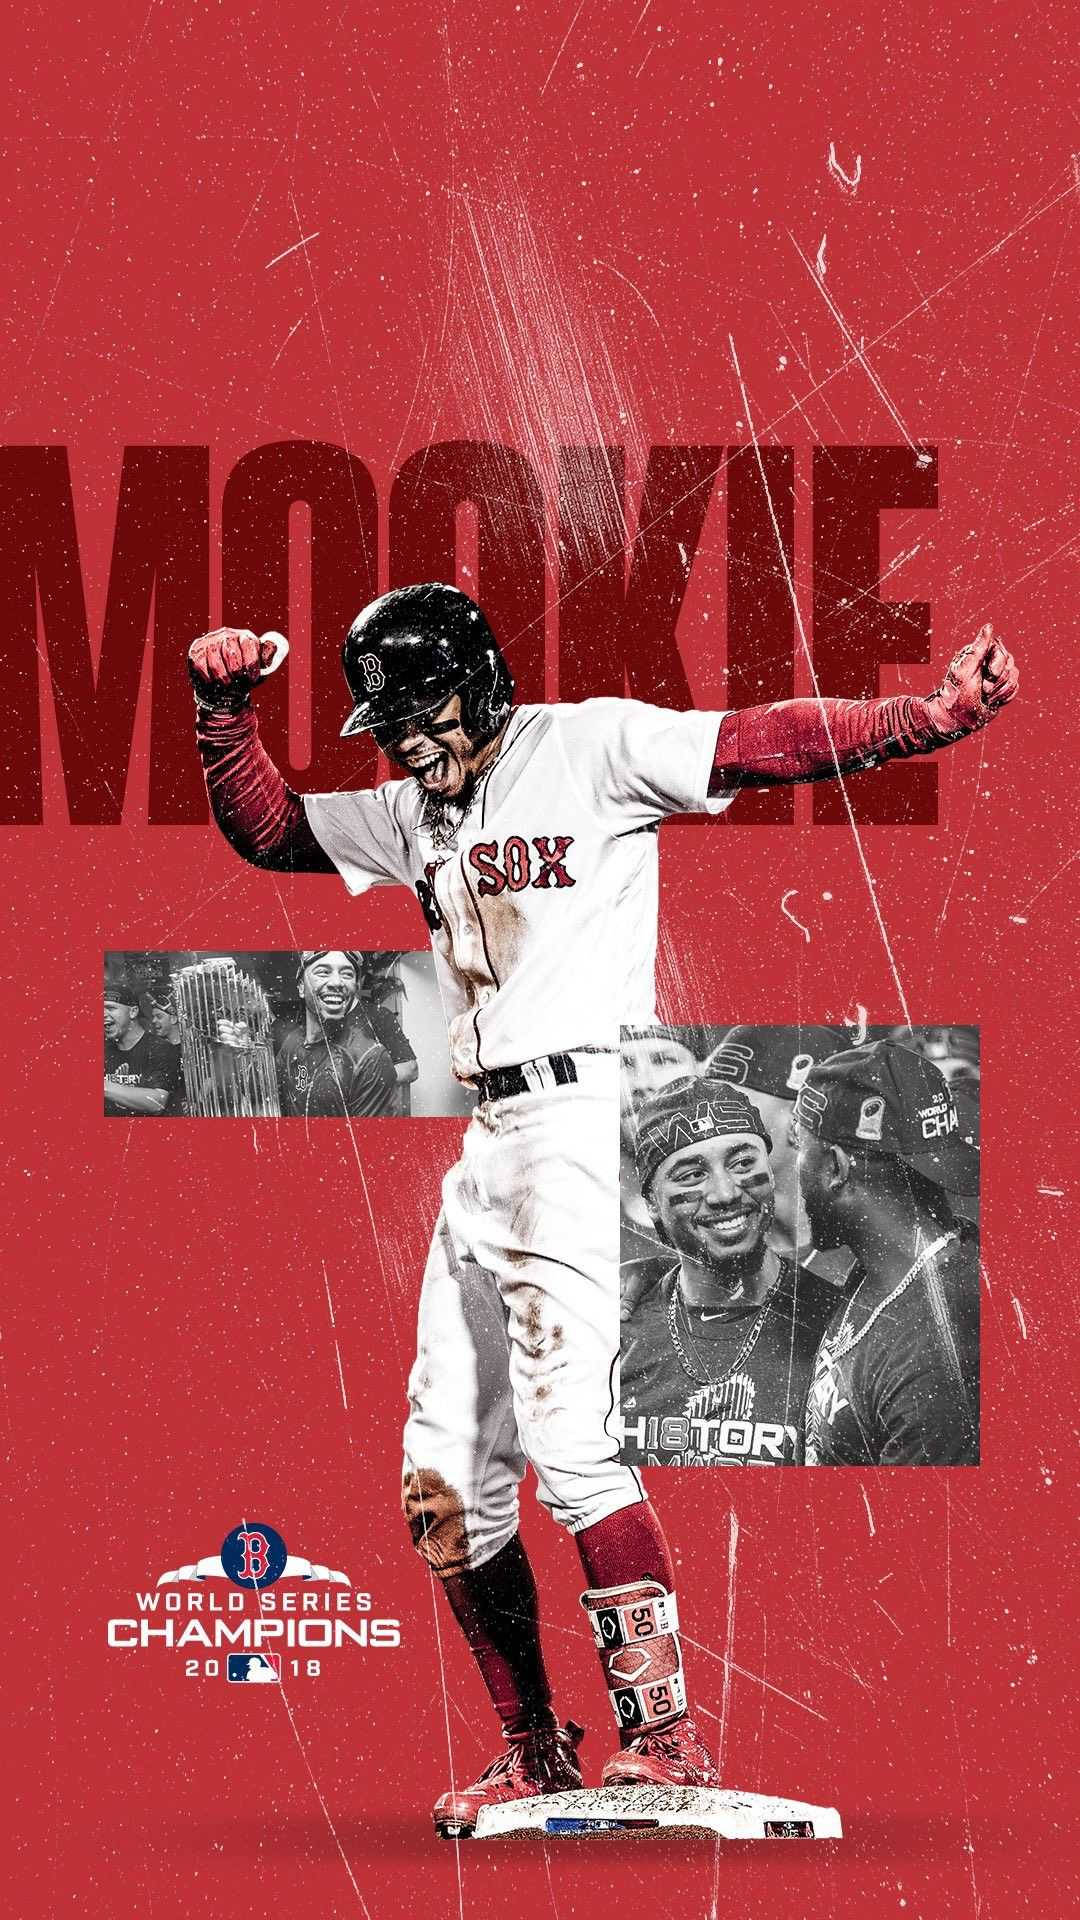 Red Sox Player Mookie Betts